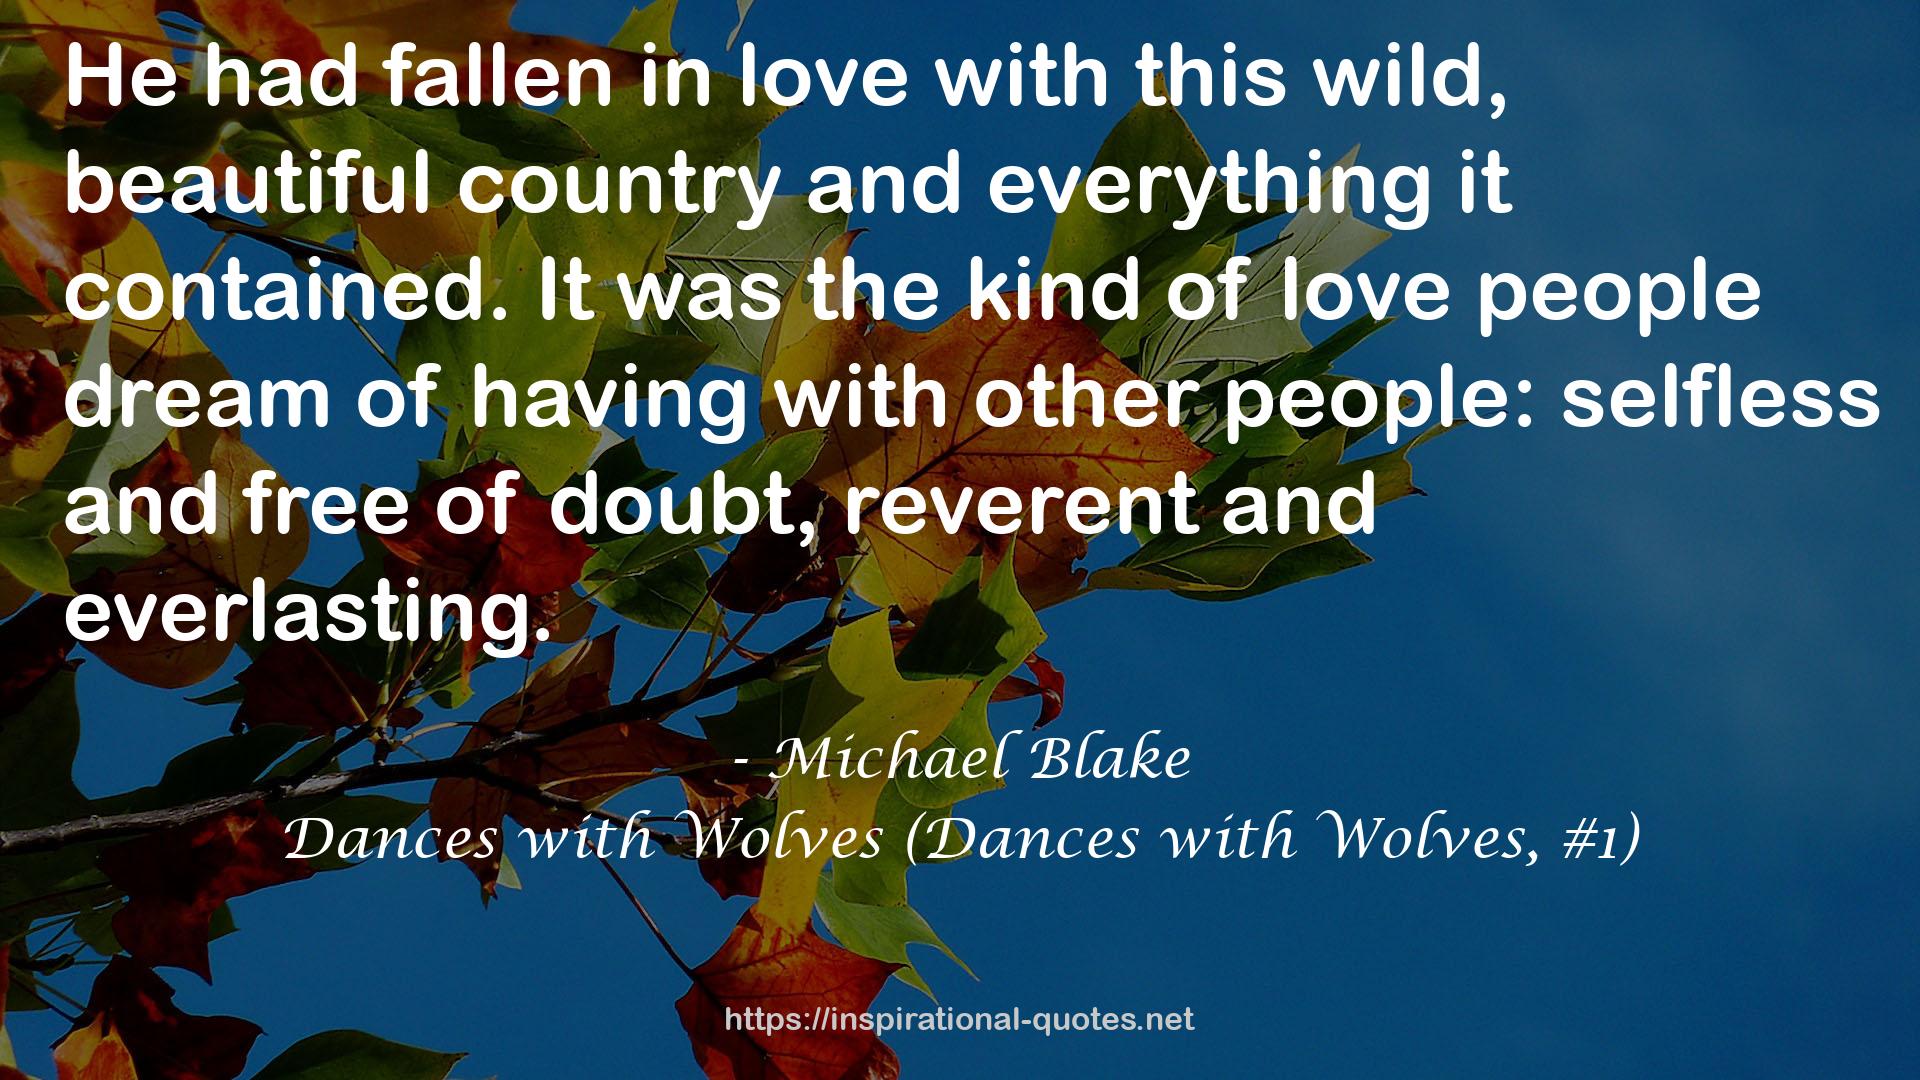 Dances with Wolves (Dances with Wolves, #1) QUOTES